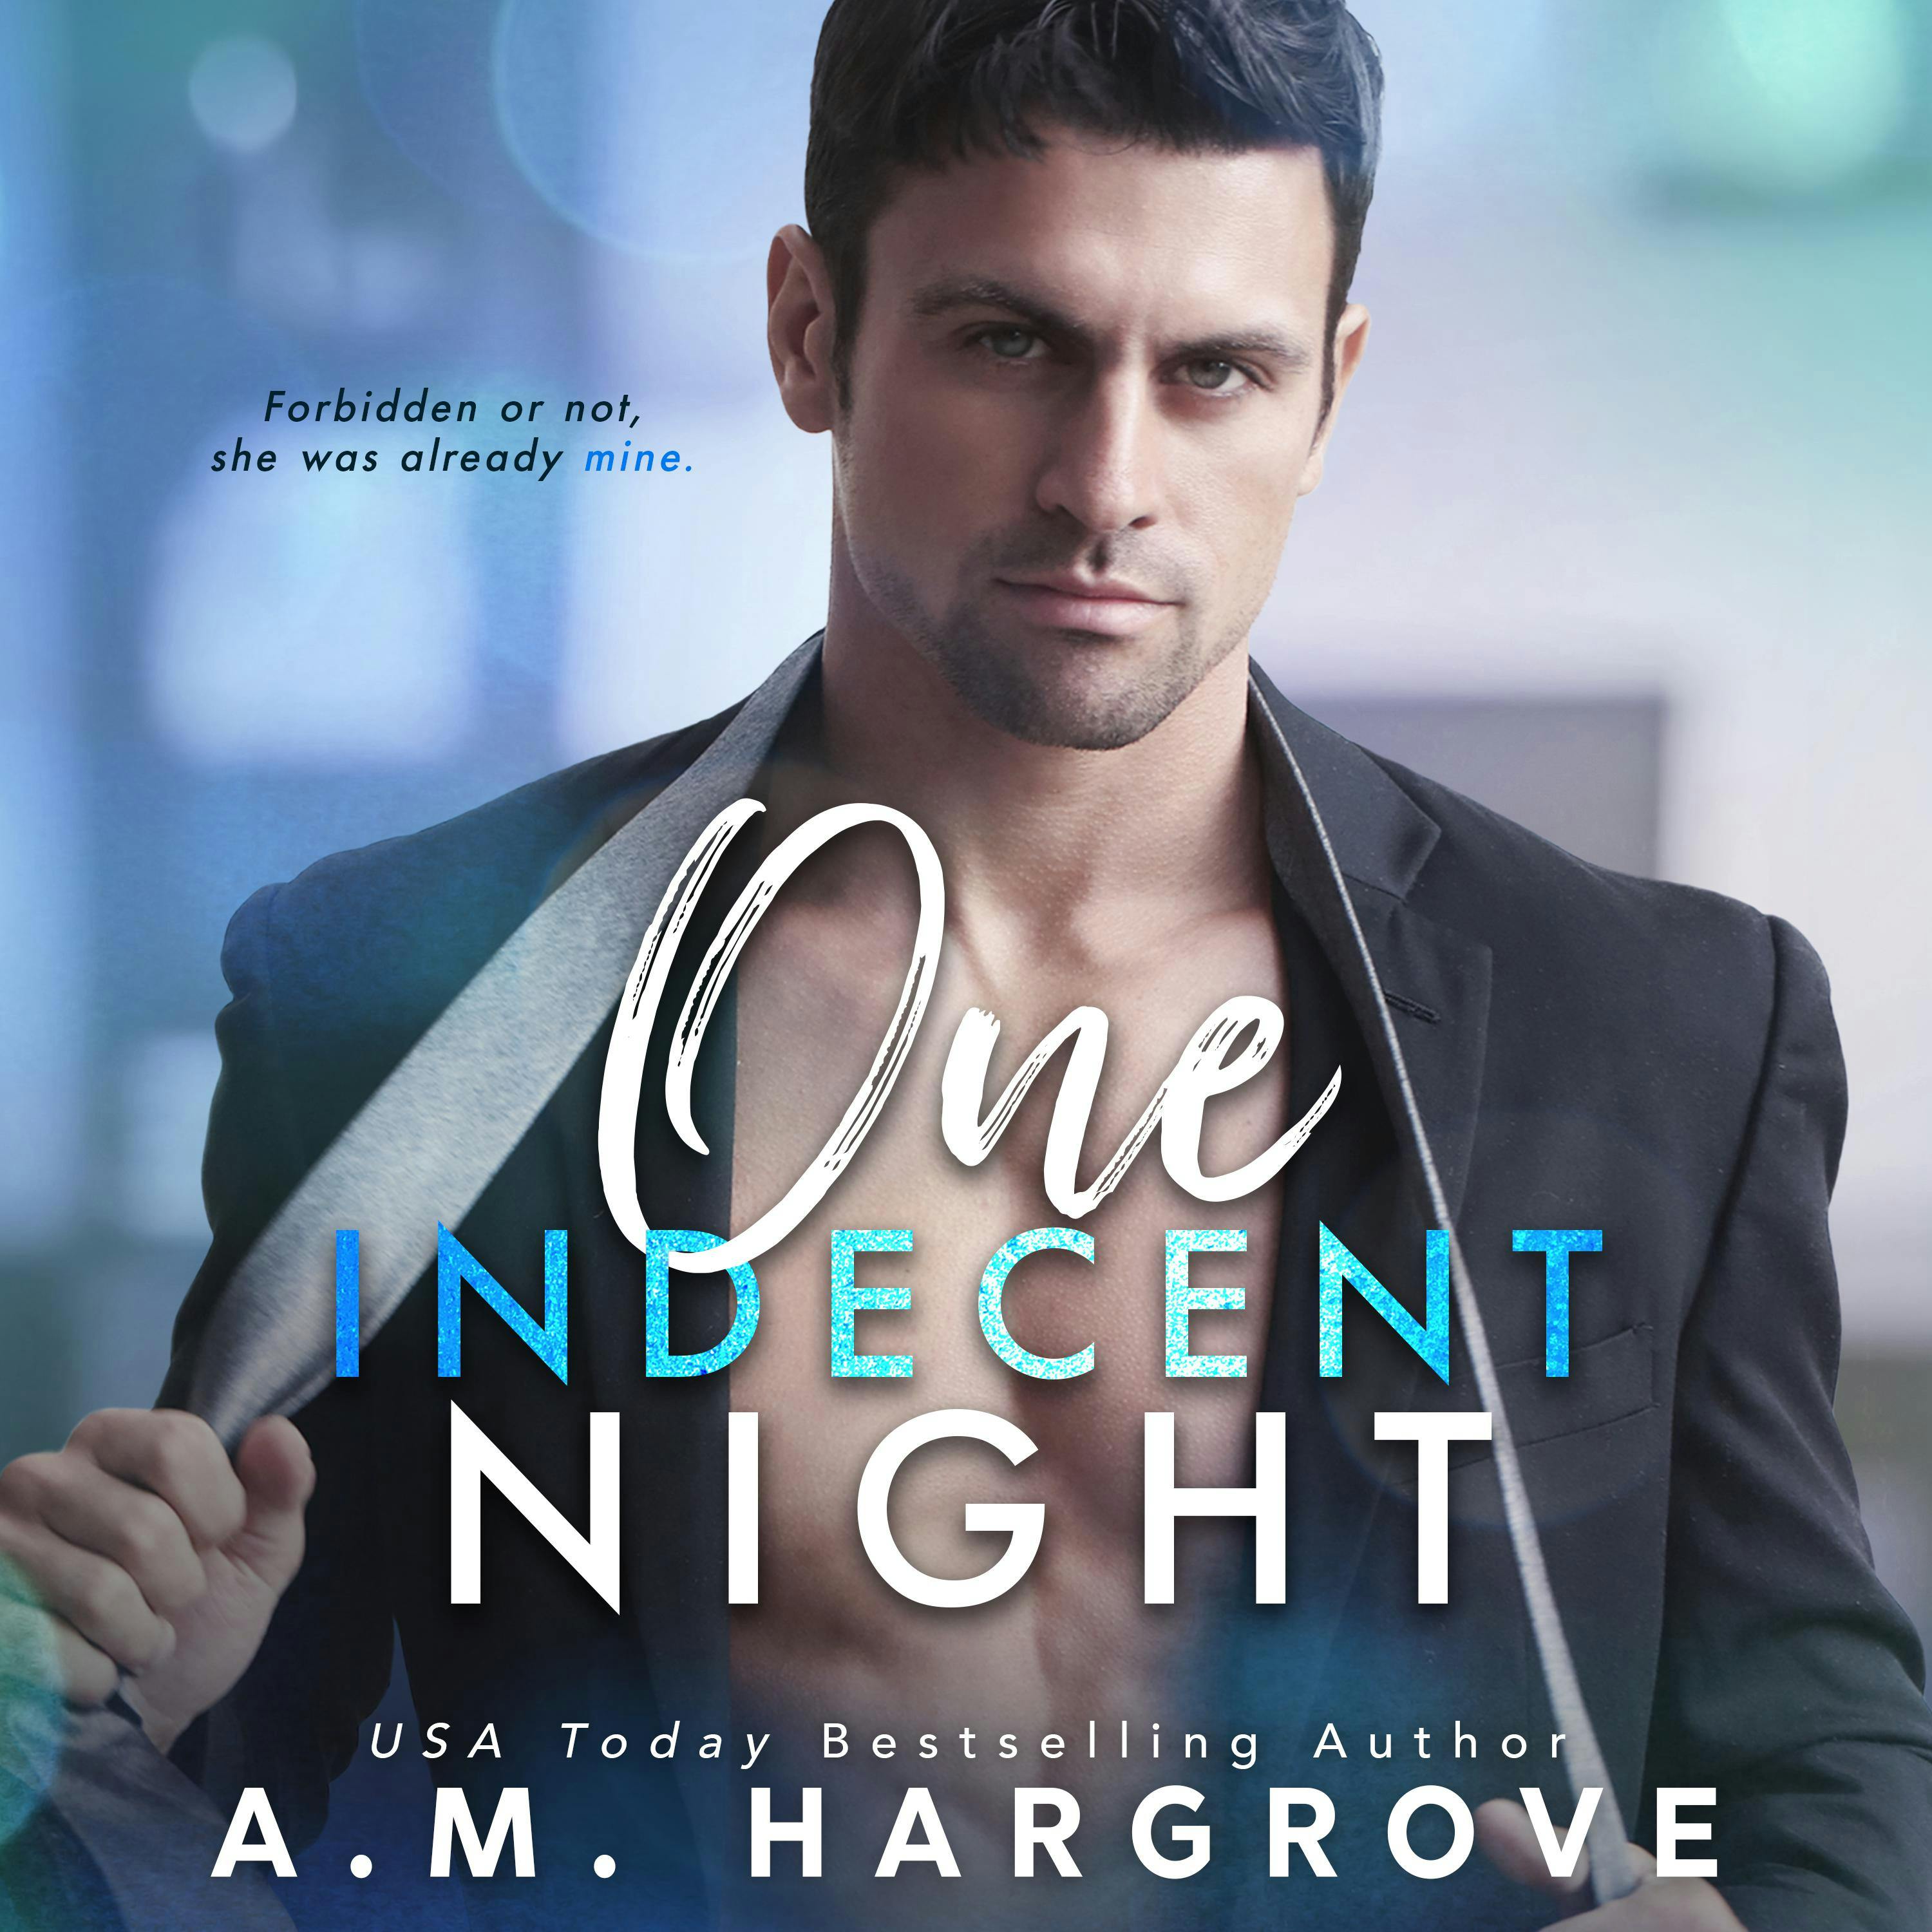 One Indecent Night: West Sisters Novel Book 1 - A.M. Hargrove